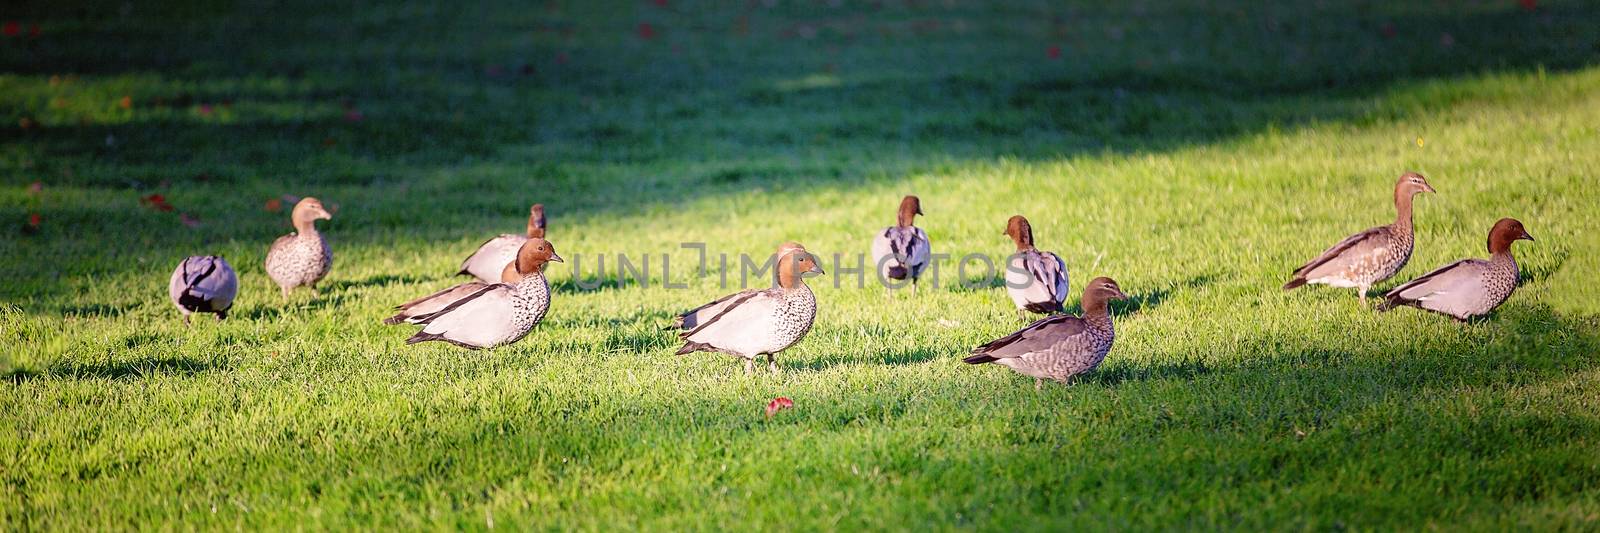 Birds wandering around a green lawn amongst the light and shadows of early morning